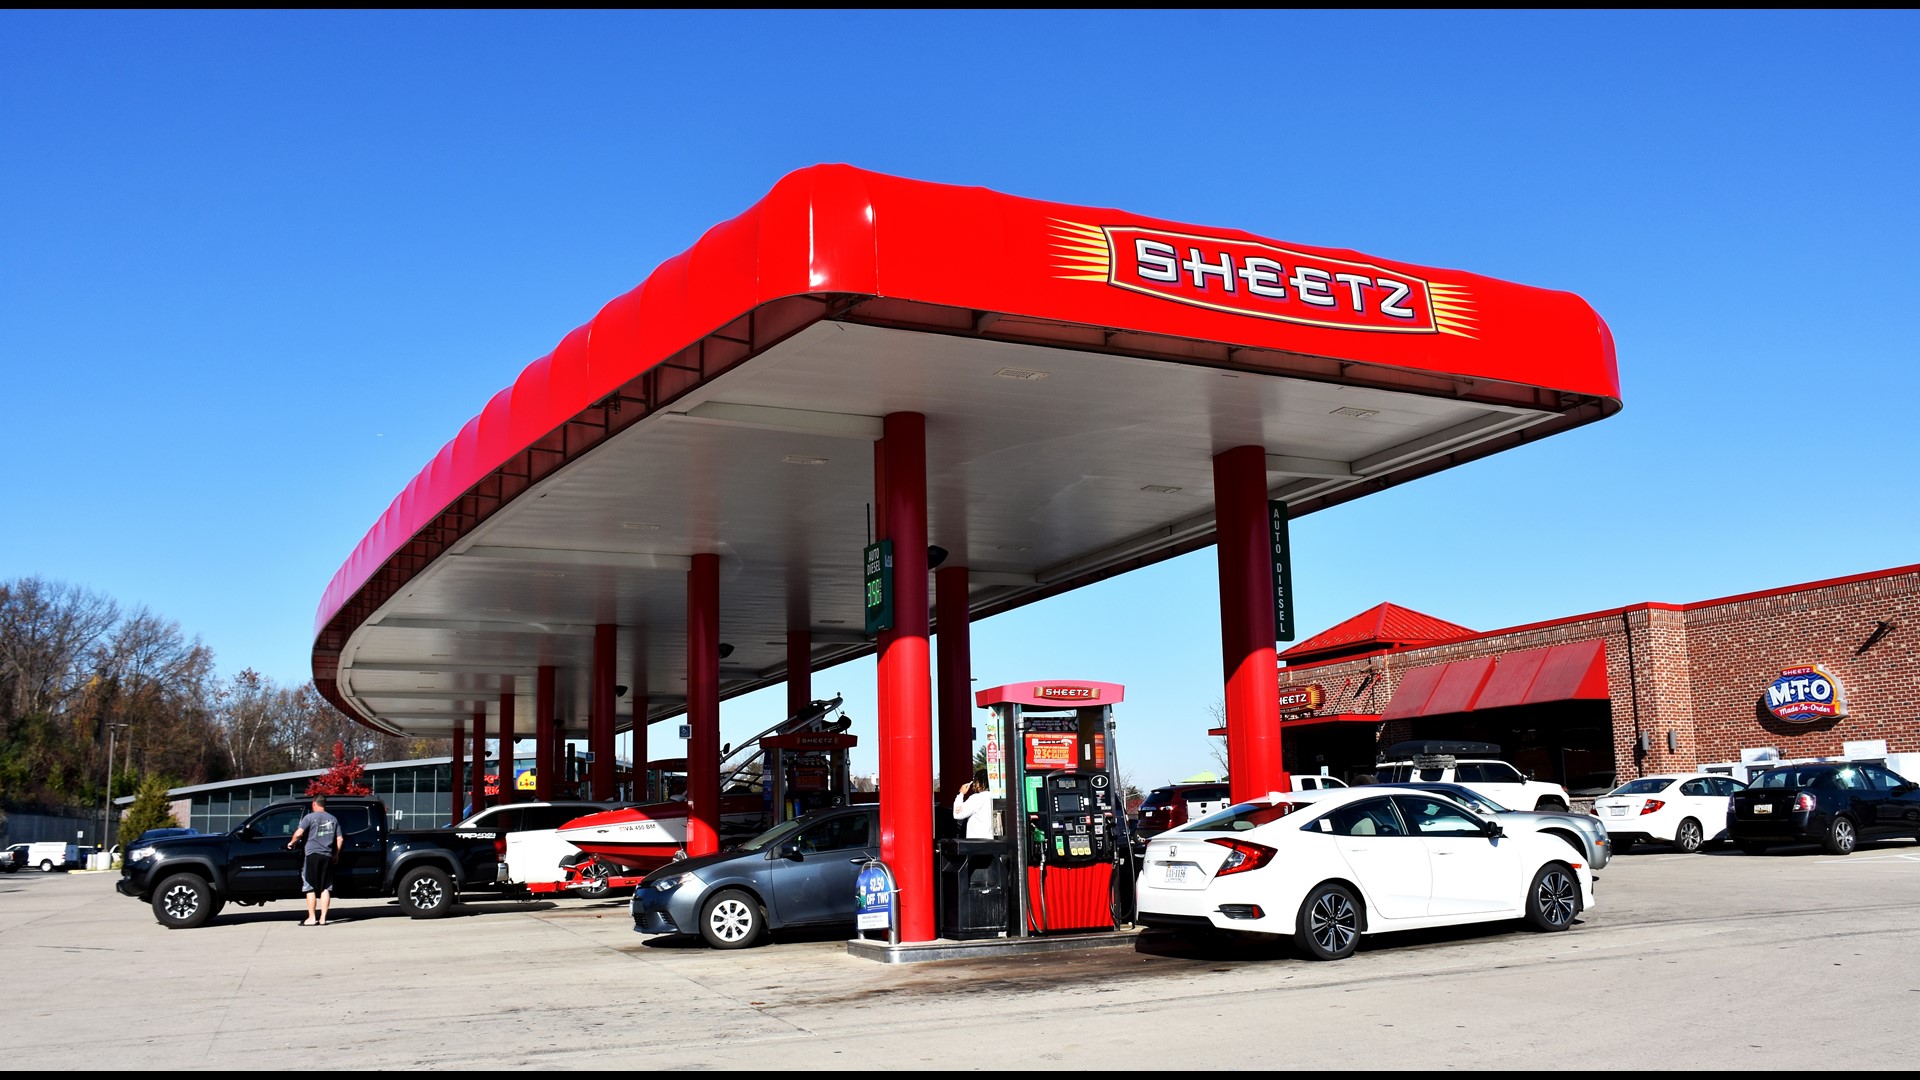 Sheetz is easing pain at the pump by lowering the price of gas for a limited time through the July 4 holiday.